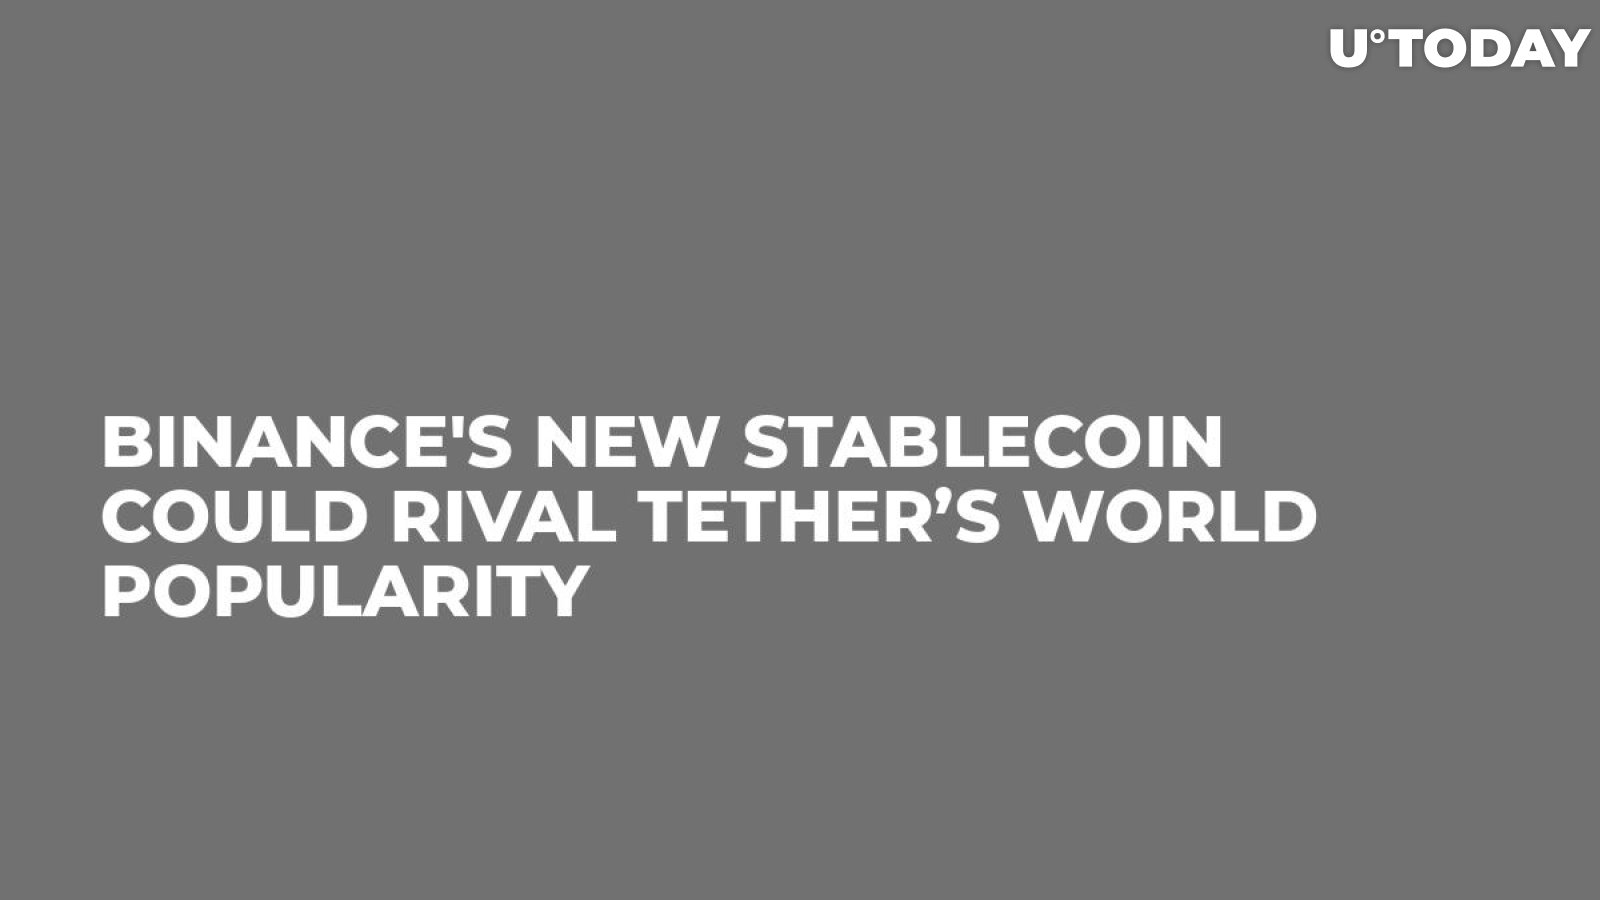 Binance's New Stablecoin Could Rival Tether’s World Popularity